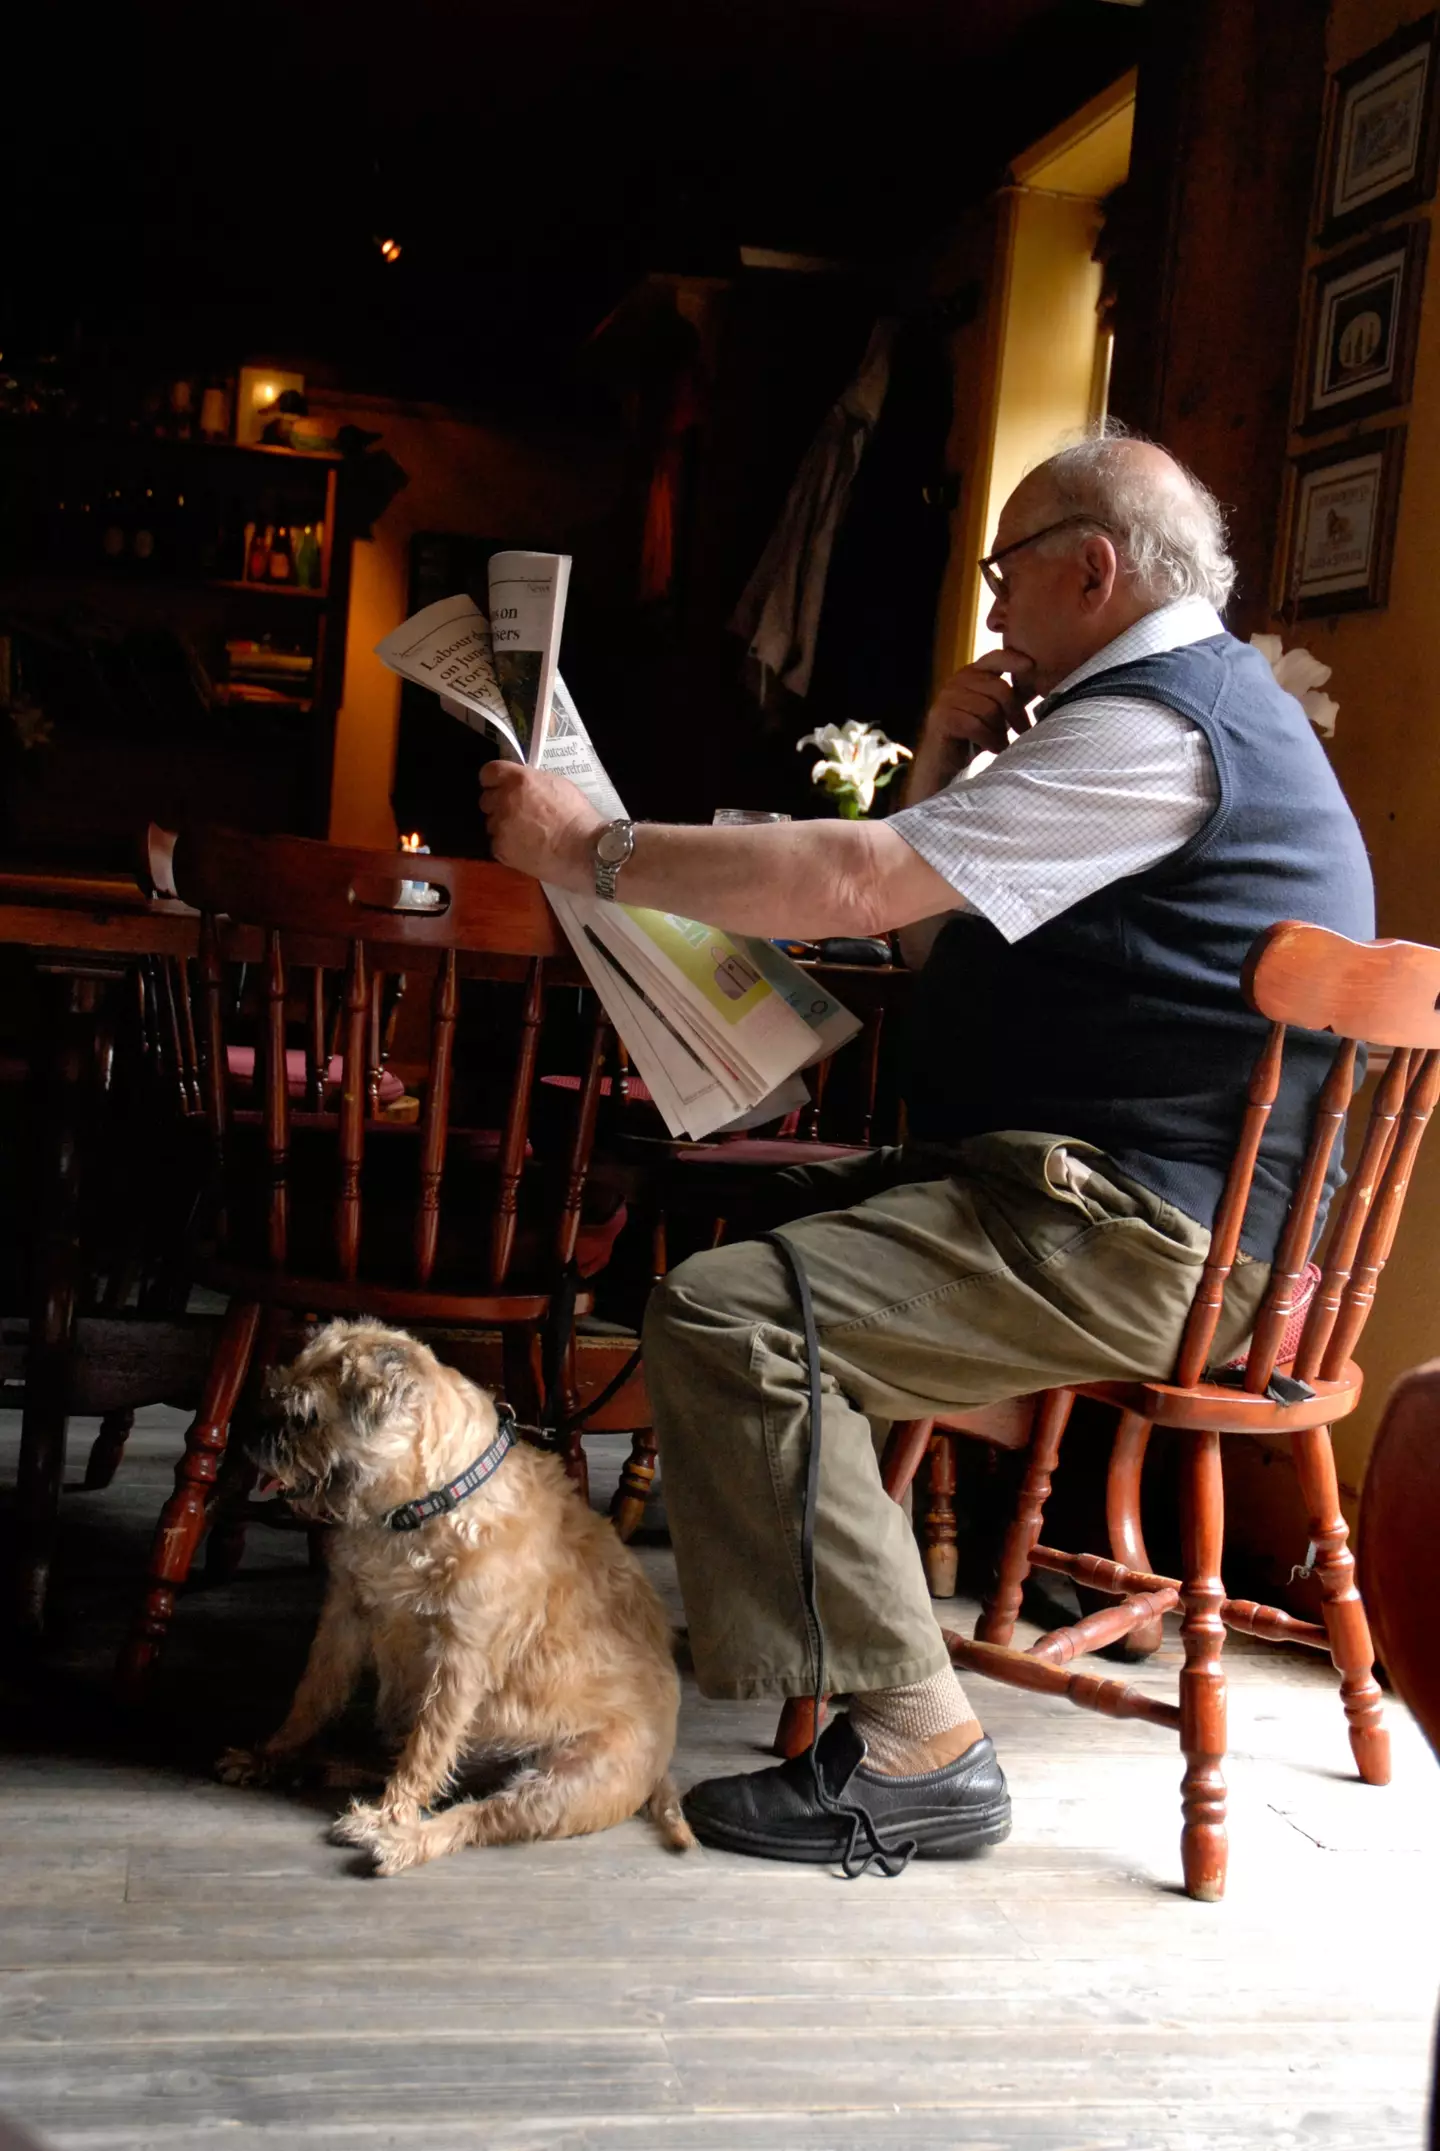 Not everyone is a big fan of dogs in pubs.